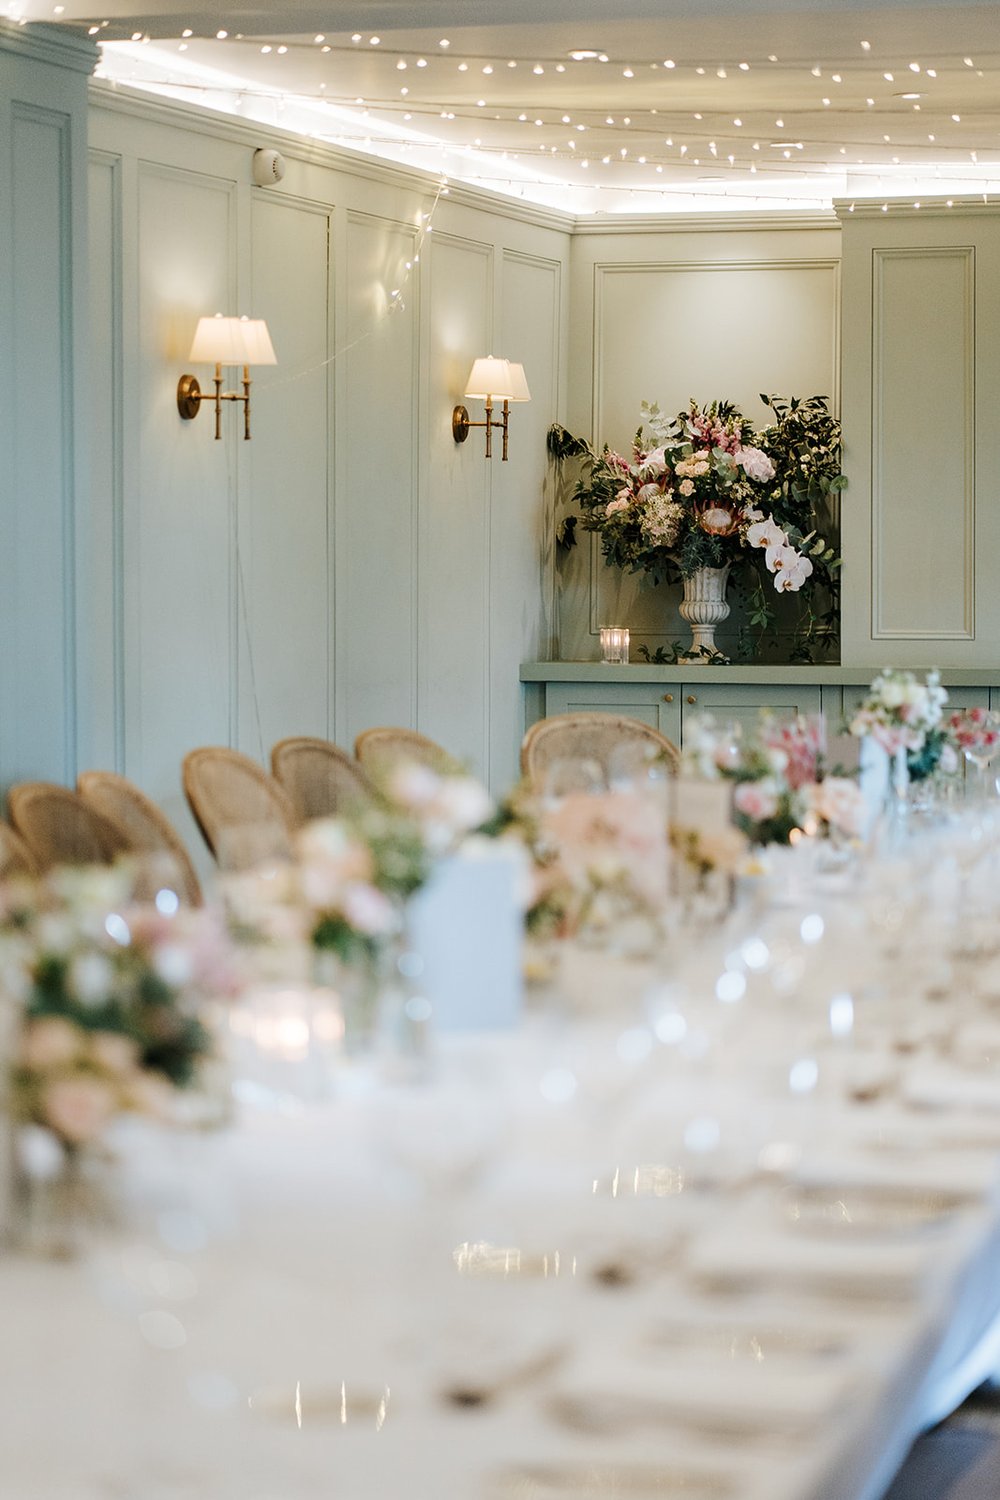 Photograph of long table for wedding breakfast setup with lovely flowers by Johanna Pedrick. The tones are pastel, muted and mostly green and blue hues